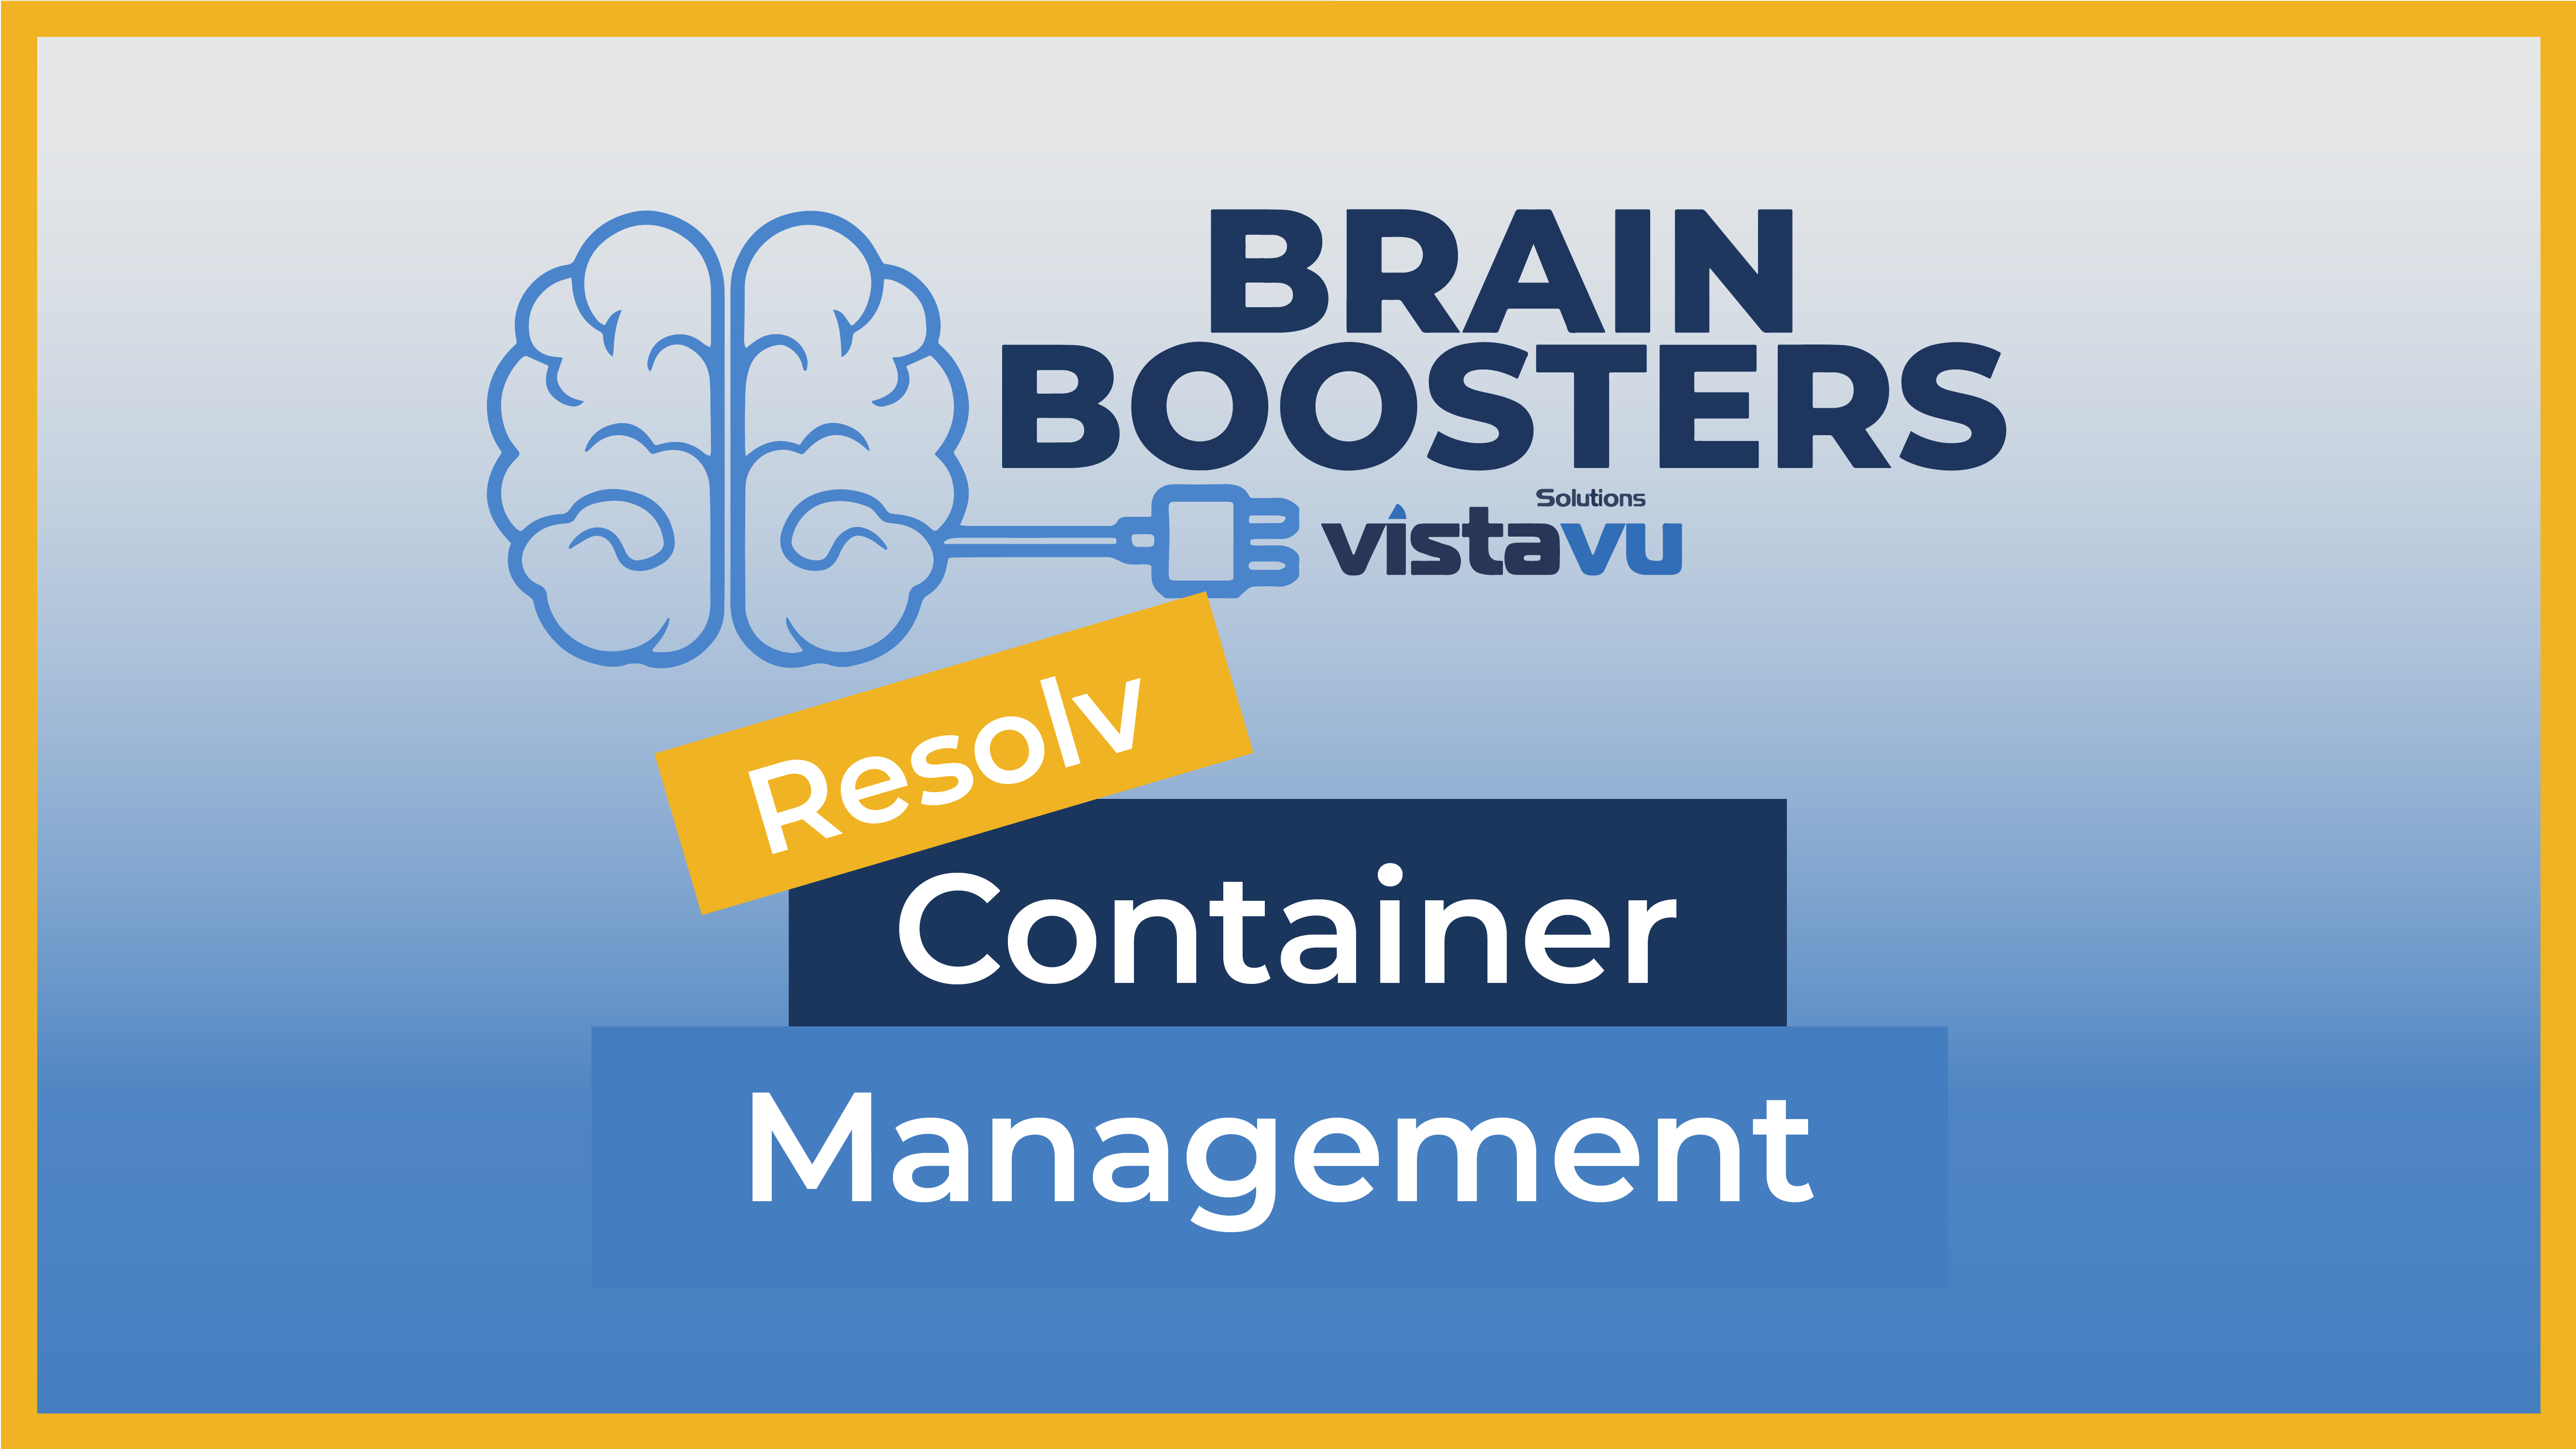 [Brain Boosters] Resolv Container Management in SAP Business One